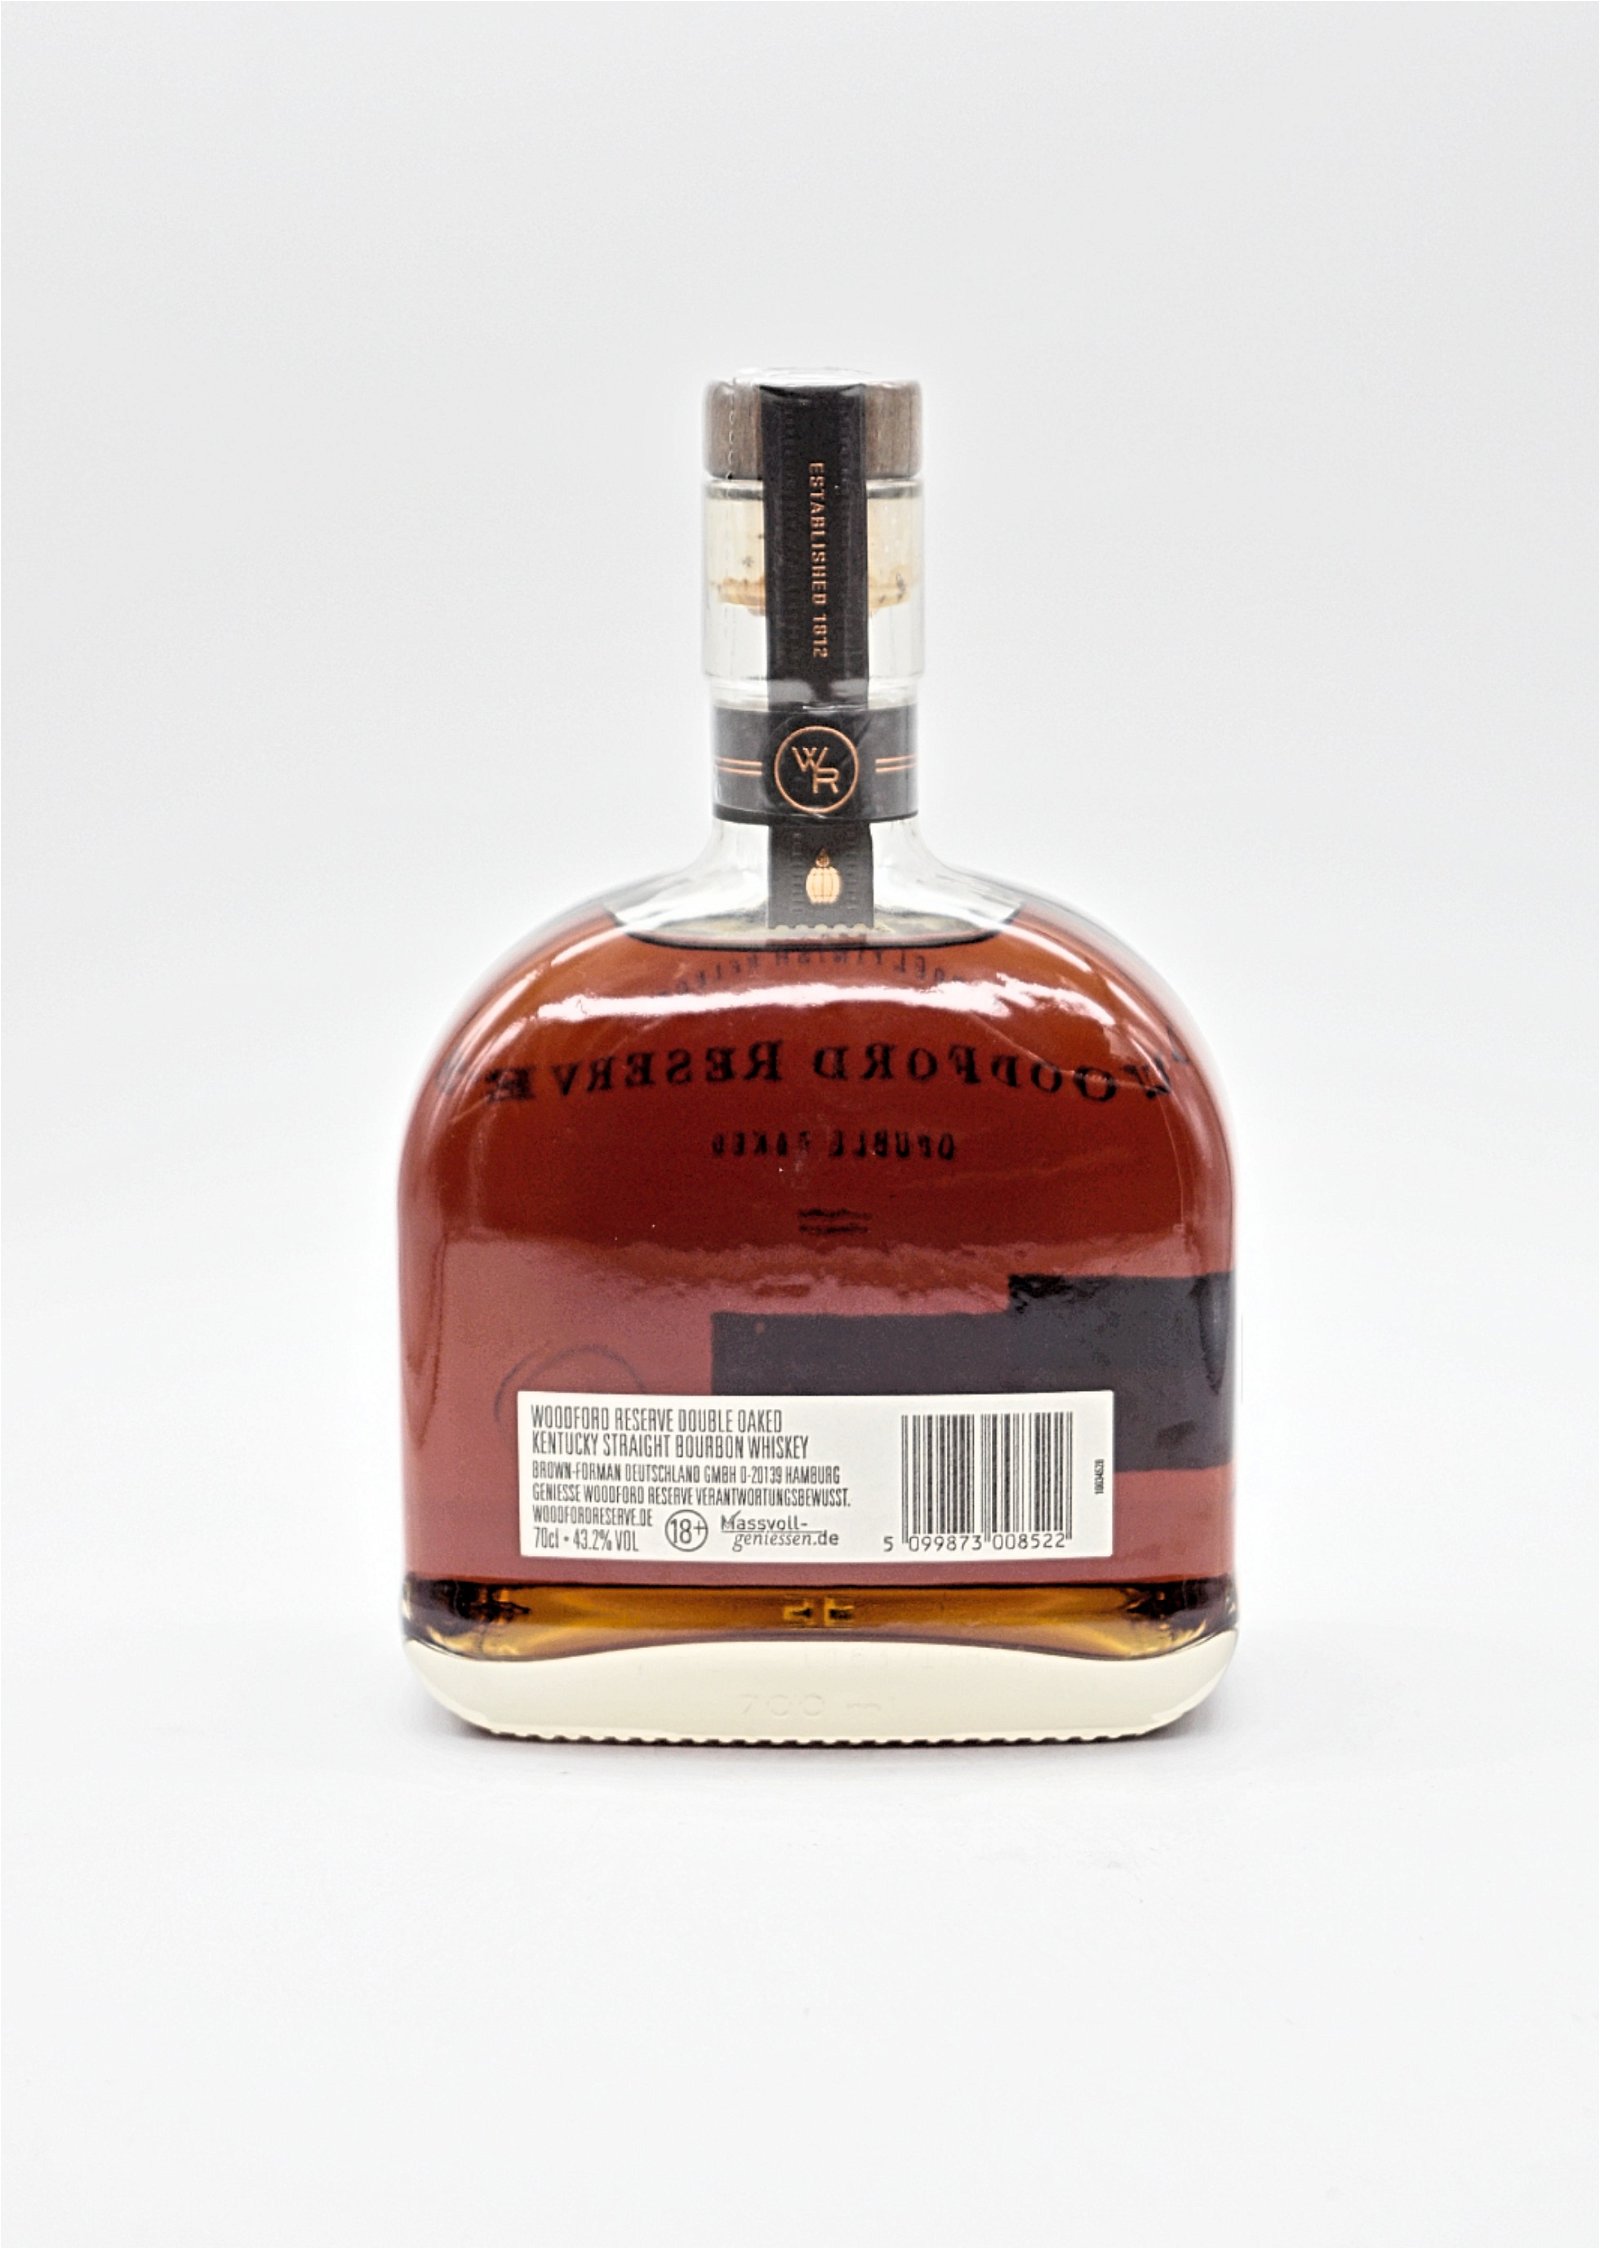 Woodford Reserve Double Oaked Barrel Finish Select Kentucky Straight Bourbon Whiskey